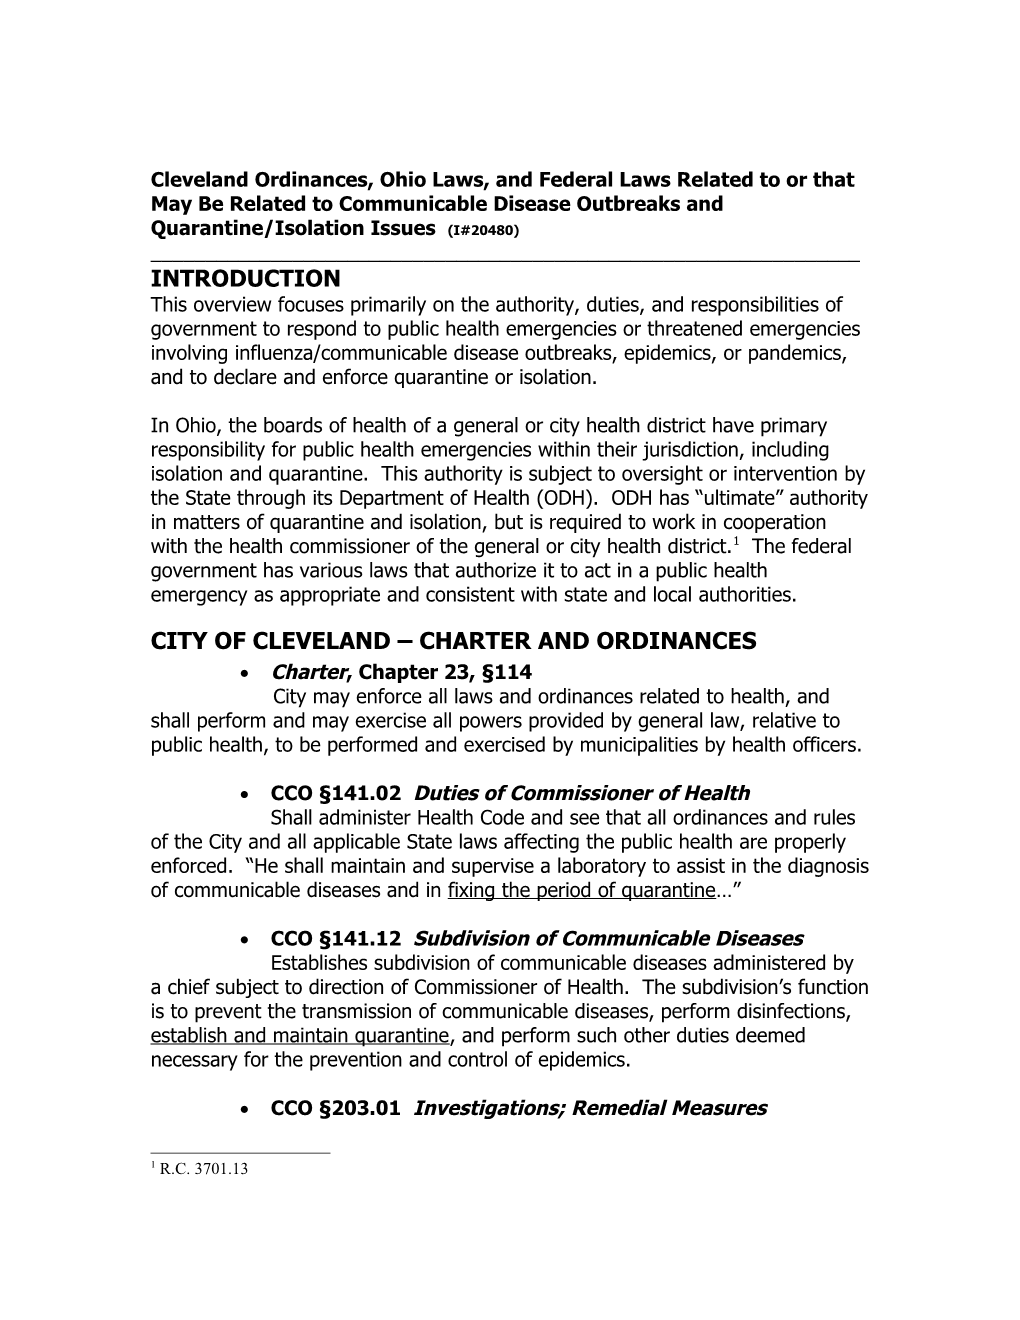 City of Cleveland Charter and Ordinances